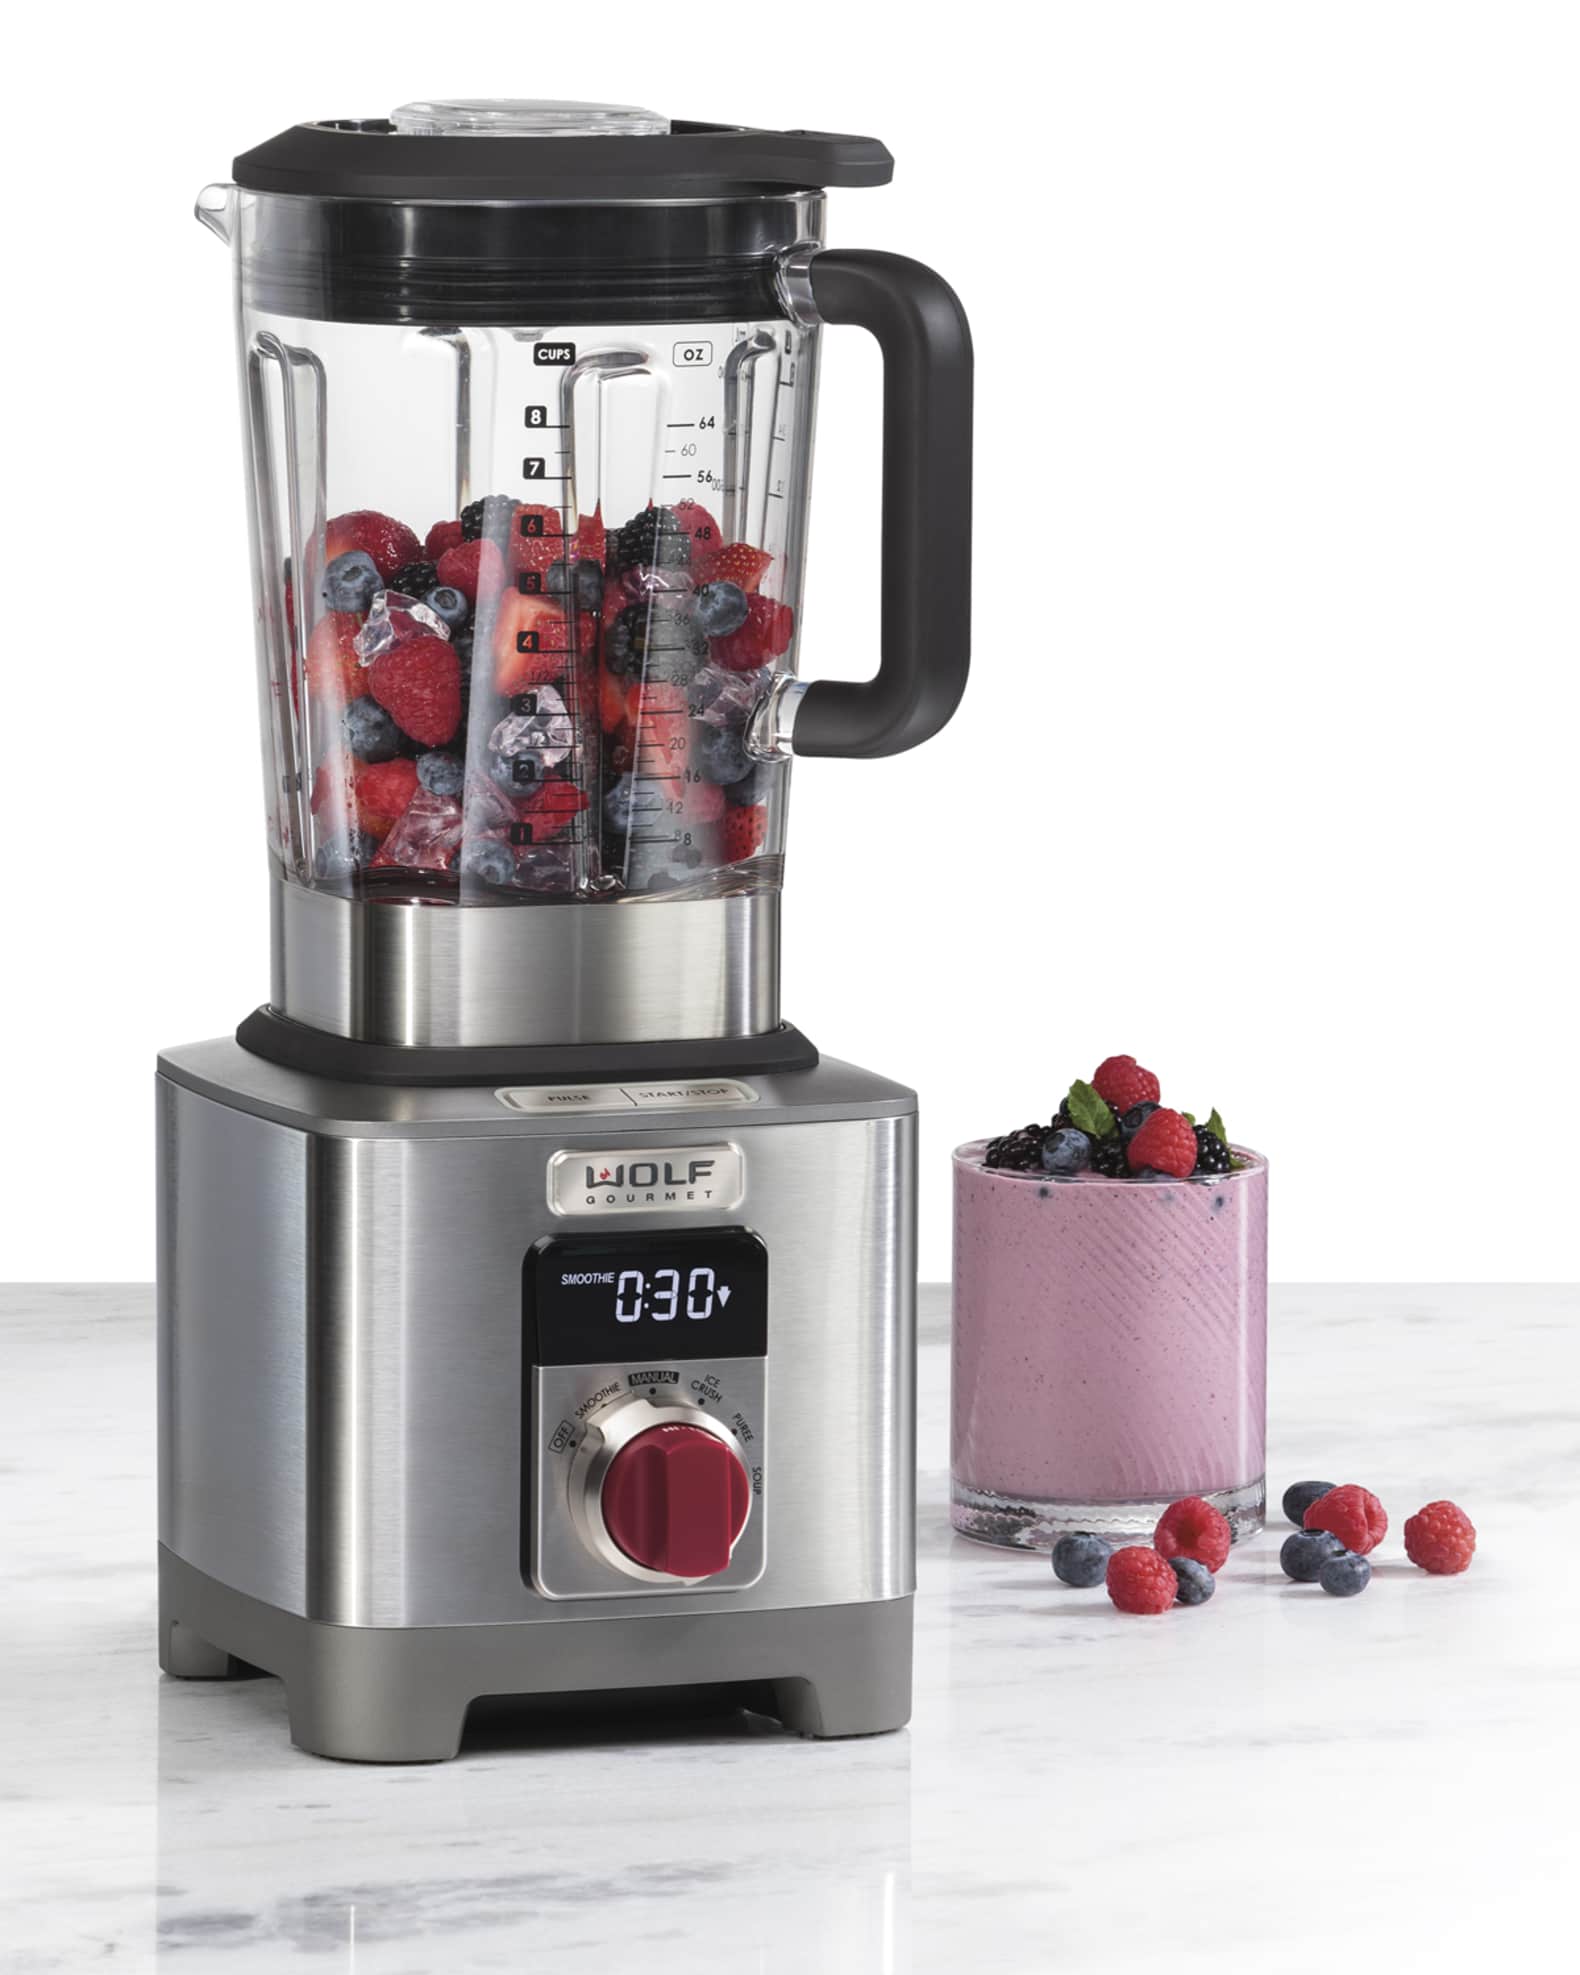 Wolf Gourmet Pro-Performance Blender, 64 oz Jar, 4 Program Settings, 12.5 Amps, Blends Food, Shakes and Smoothies, Red Knob, Stainless Steel